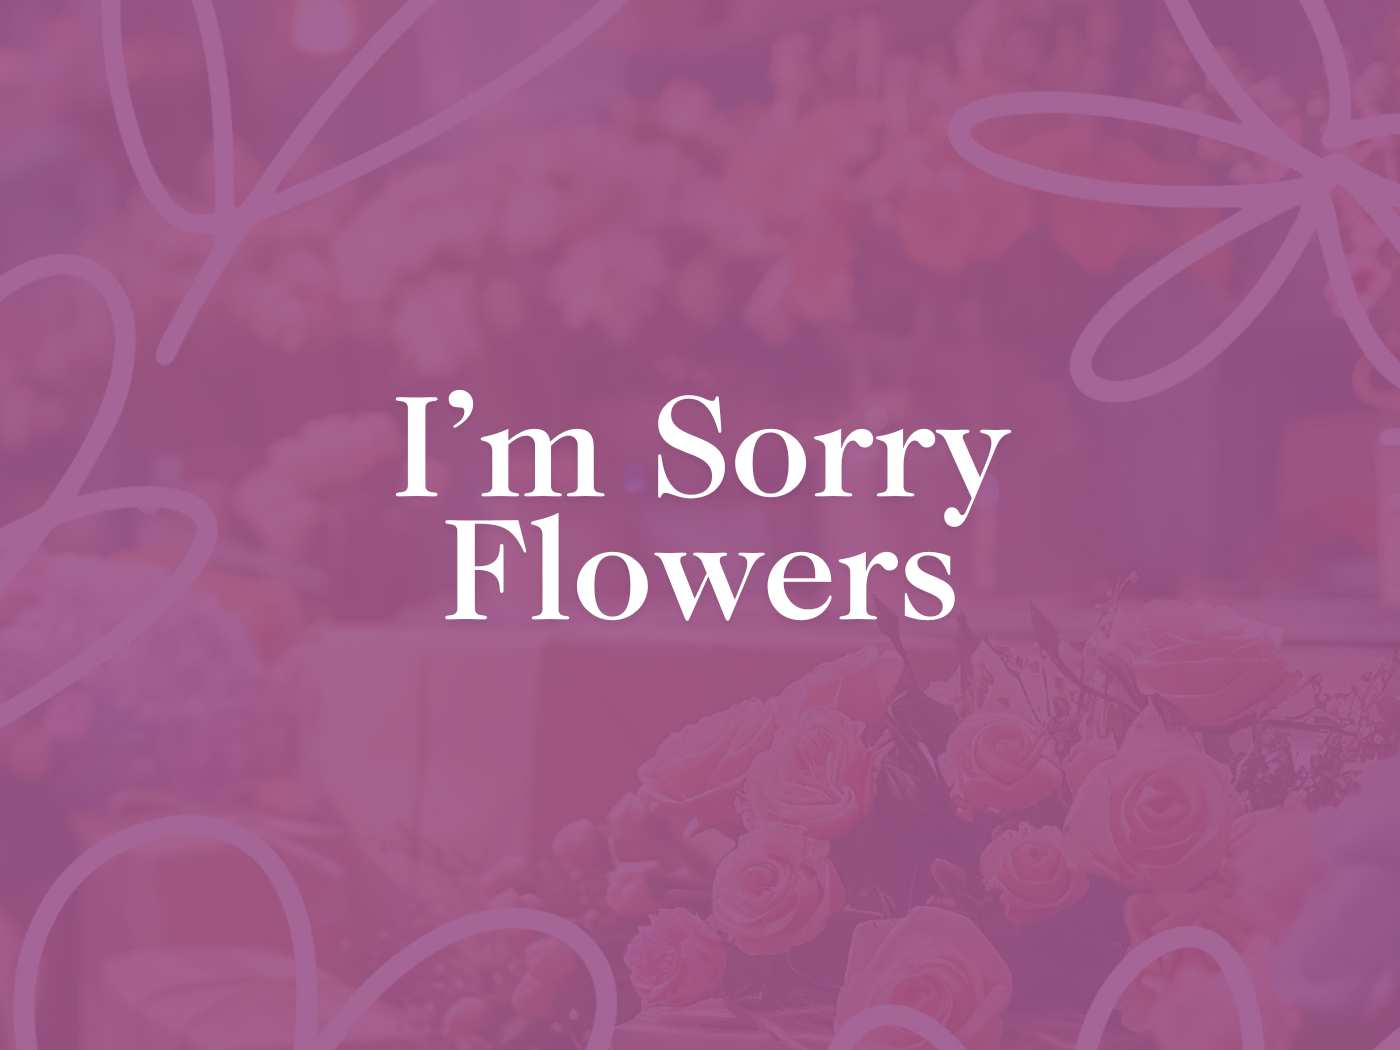 Soft pink and purple themed background with text 'I'm Sorry Flowers', showcasing a selection of apology flowers. Part of the I'm Sorry Flowers Apology Flowers Collection from Fabulous Flowers and Gifts.